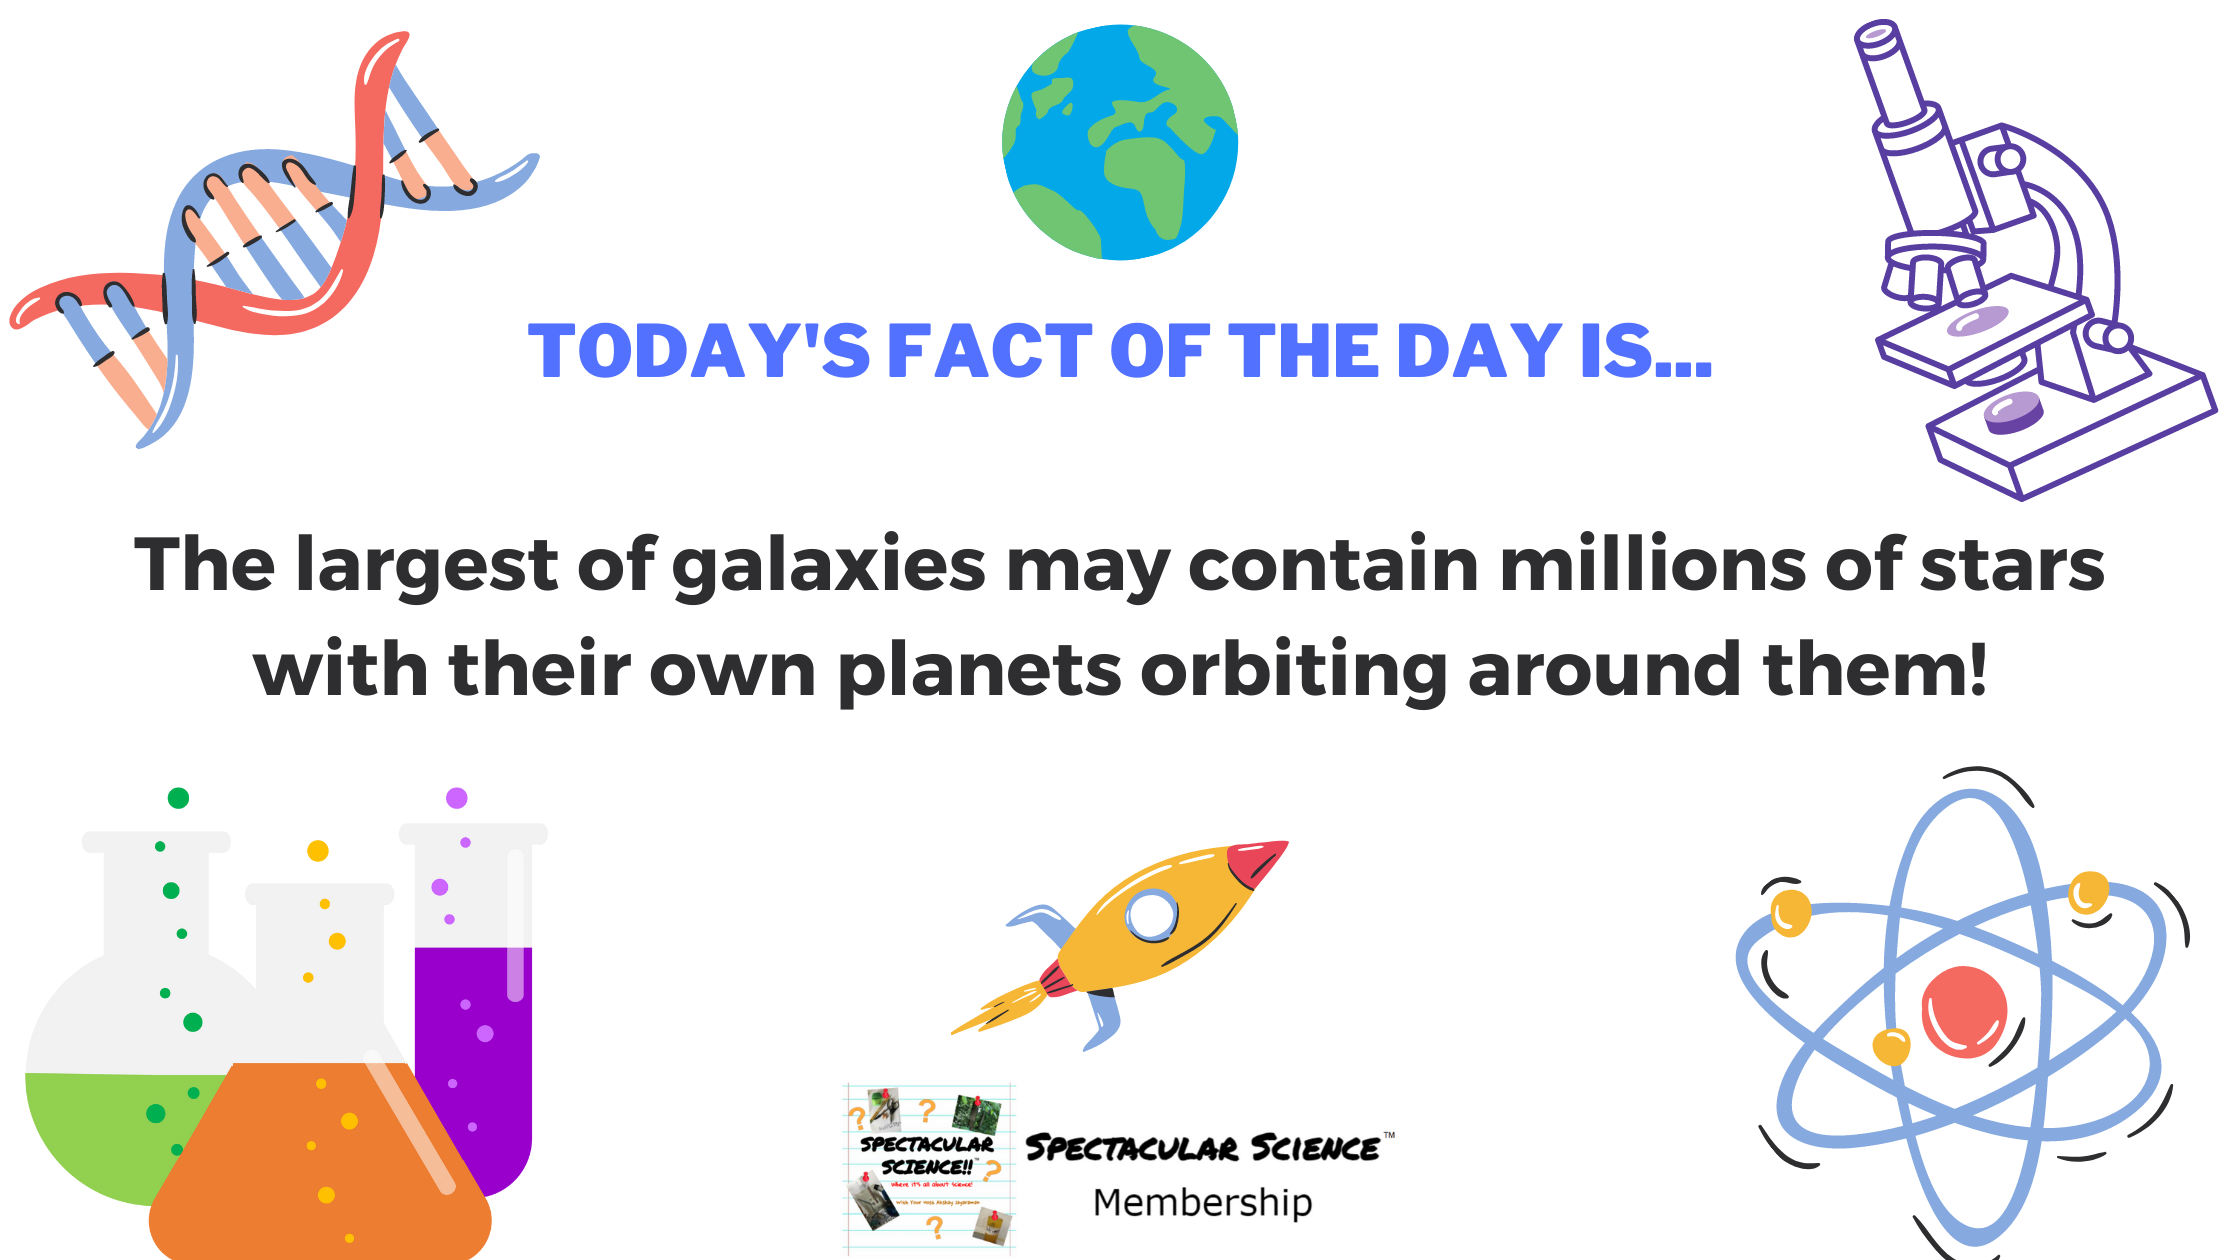 Fact of the Day Image Apr. 12th